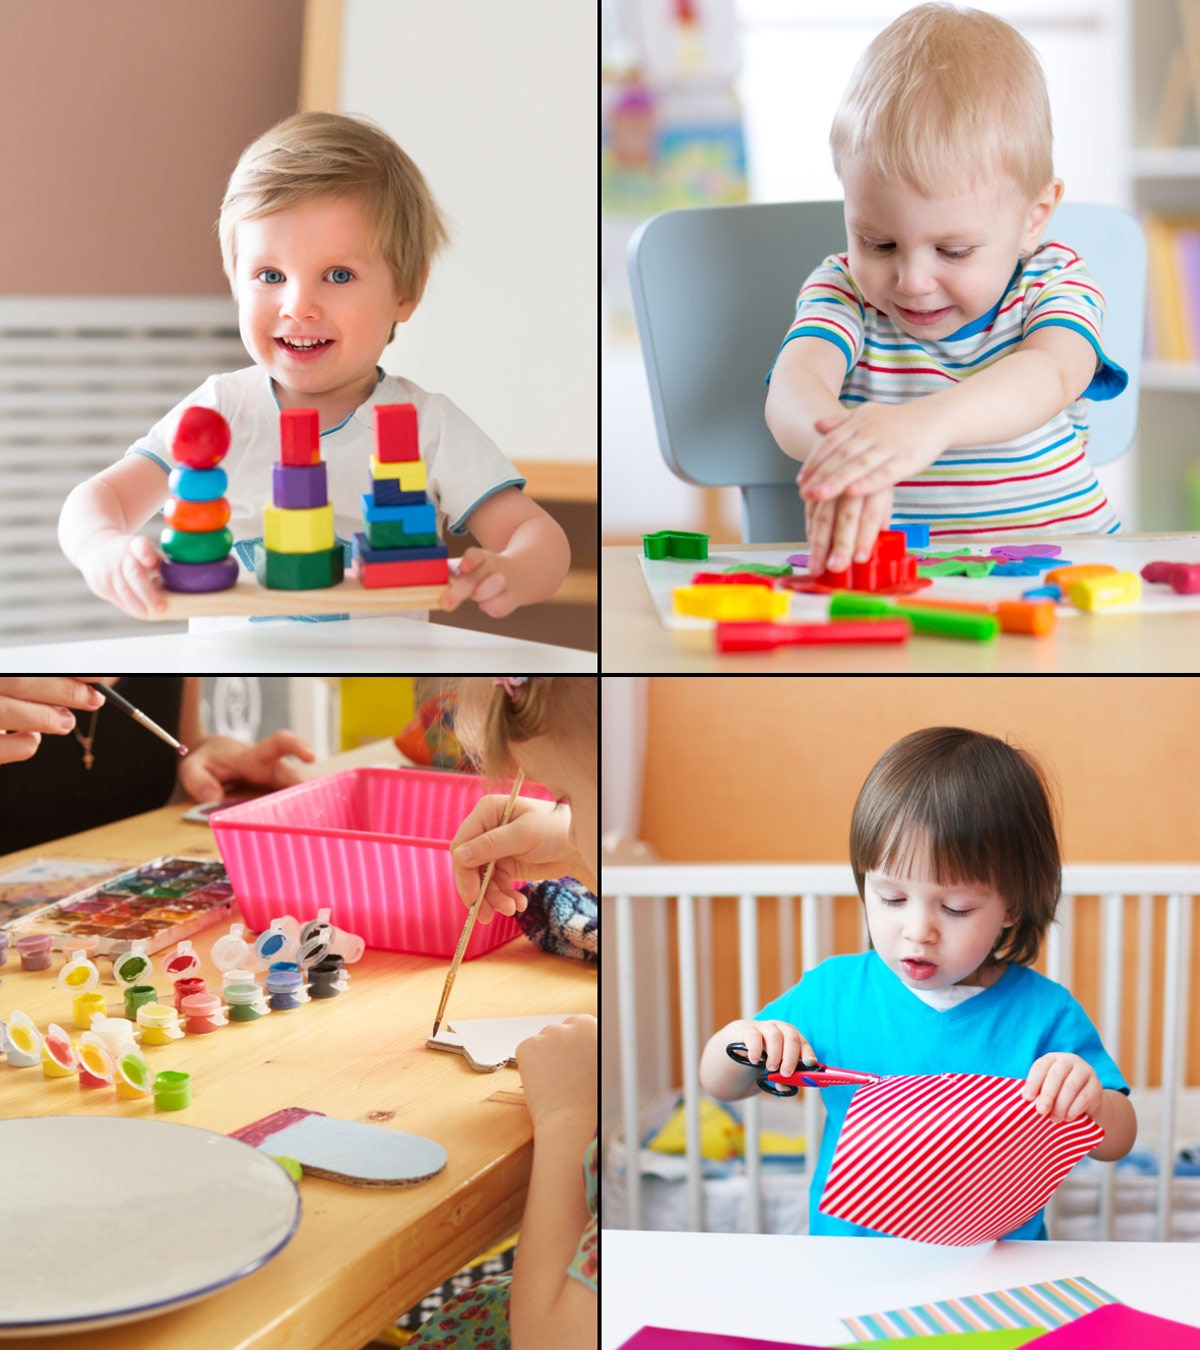 15 Creative Shape Activities For Toddlers To Do At Home